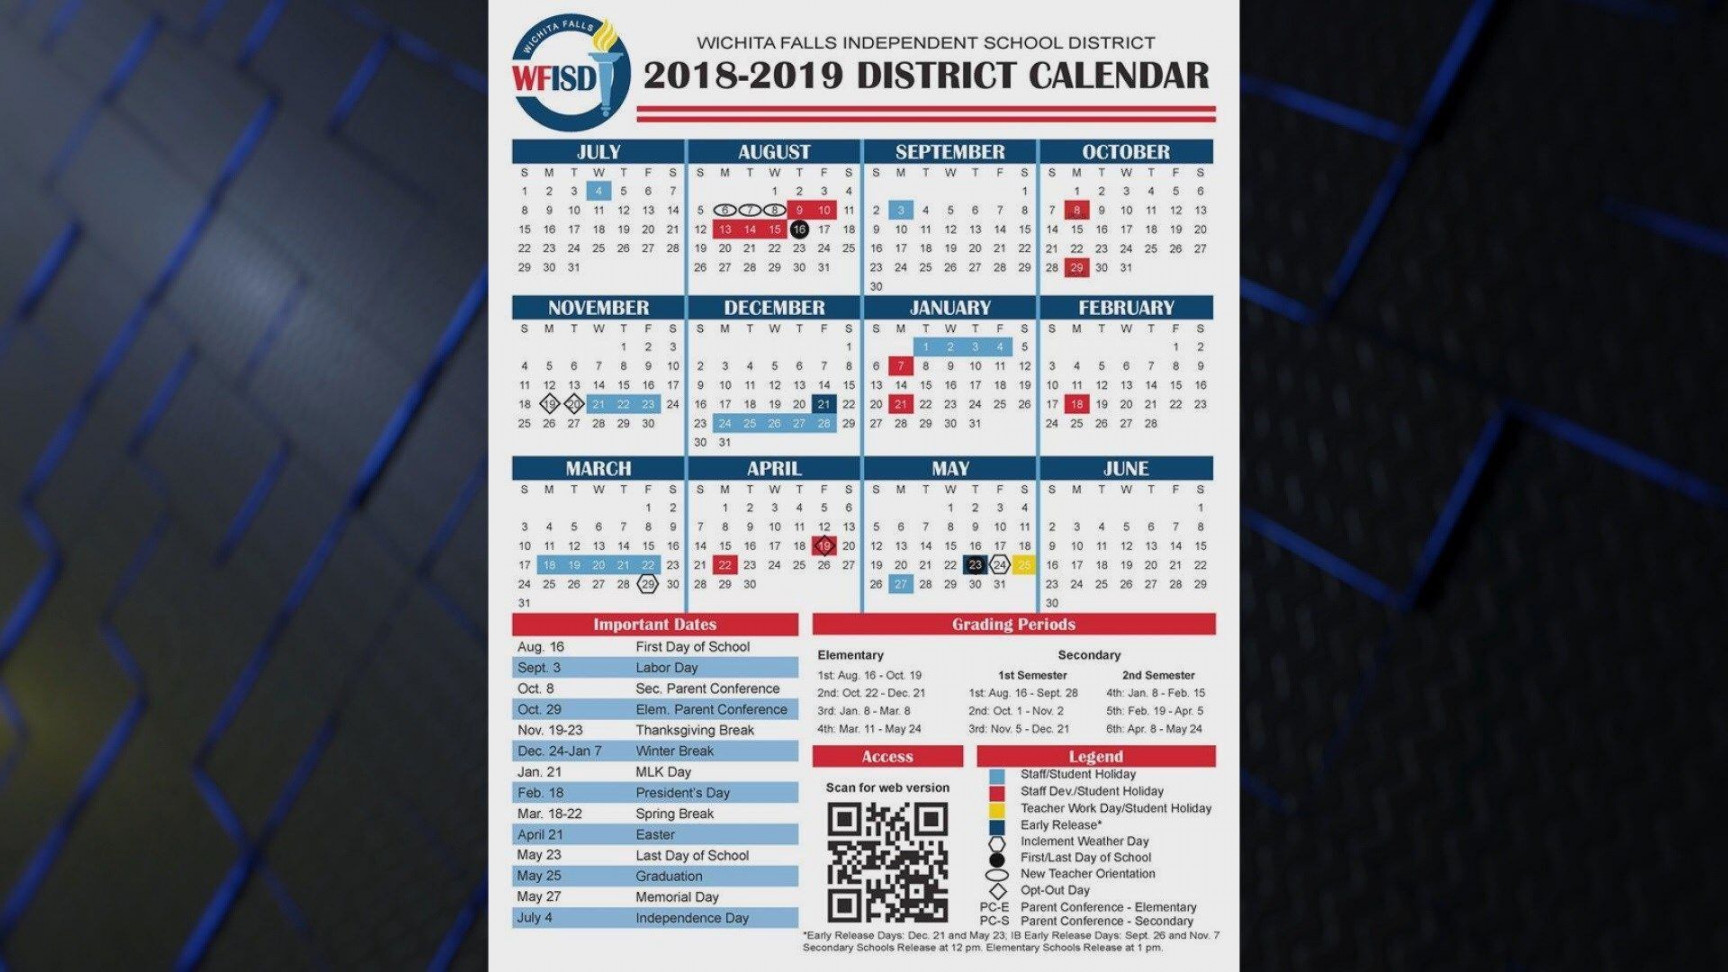 WFISD proposes new school calendar with extended Thanksgiving break